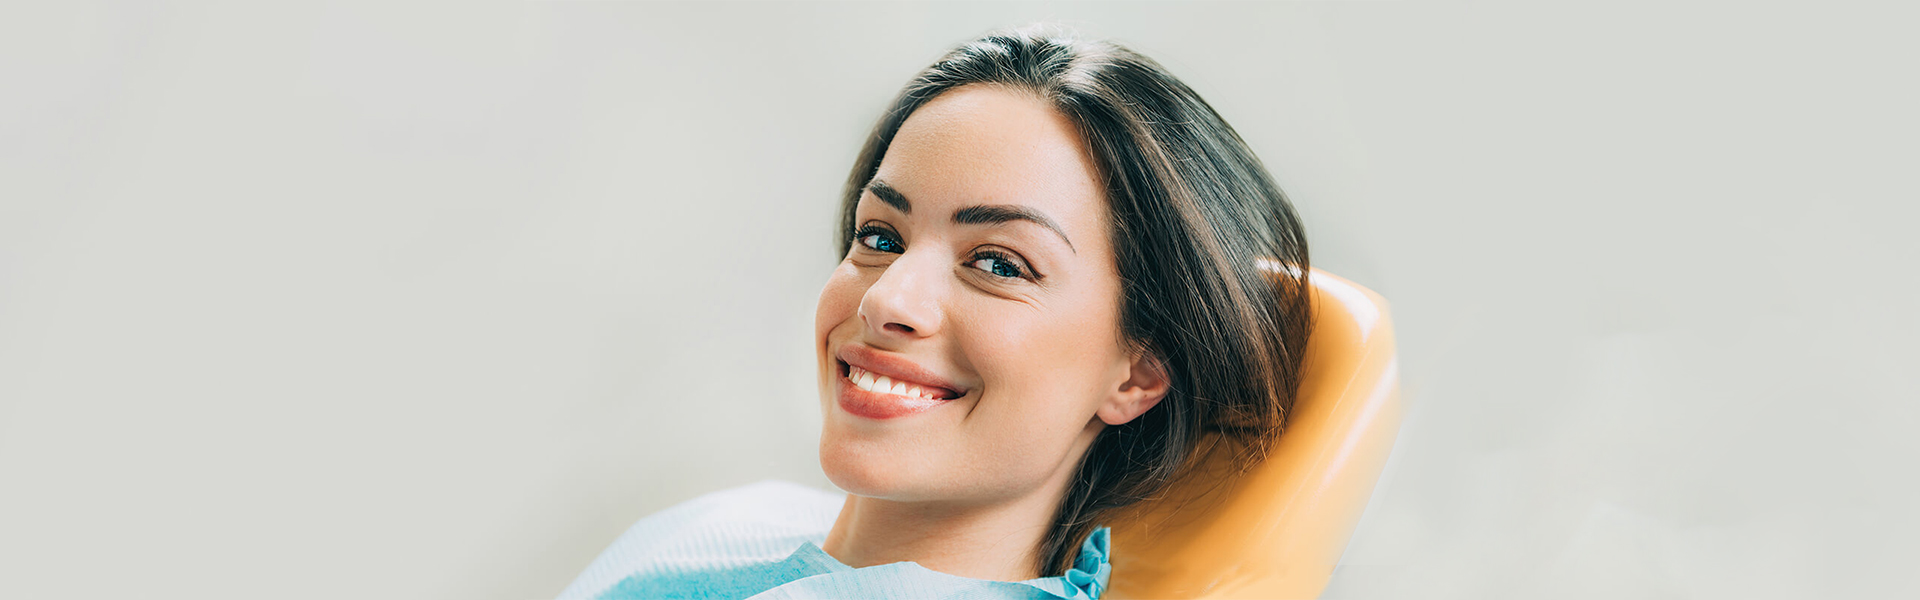 How To Successfully Get An Effective Root Canal Procedure Done